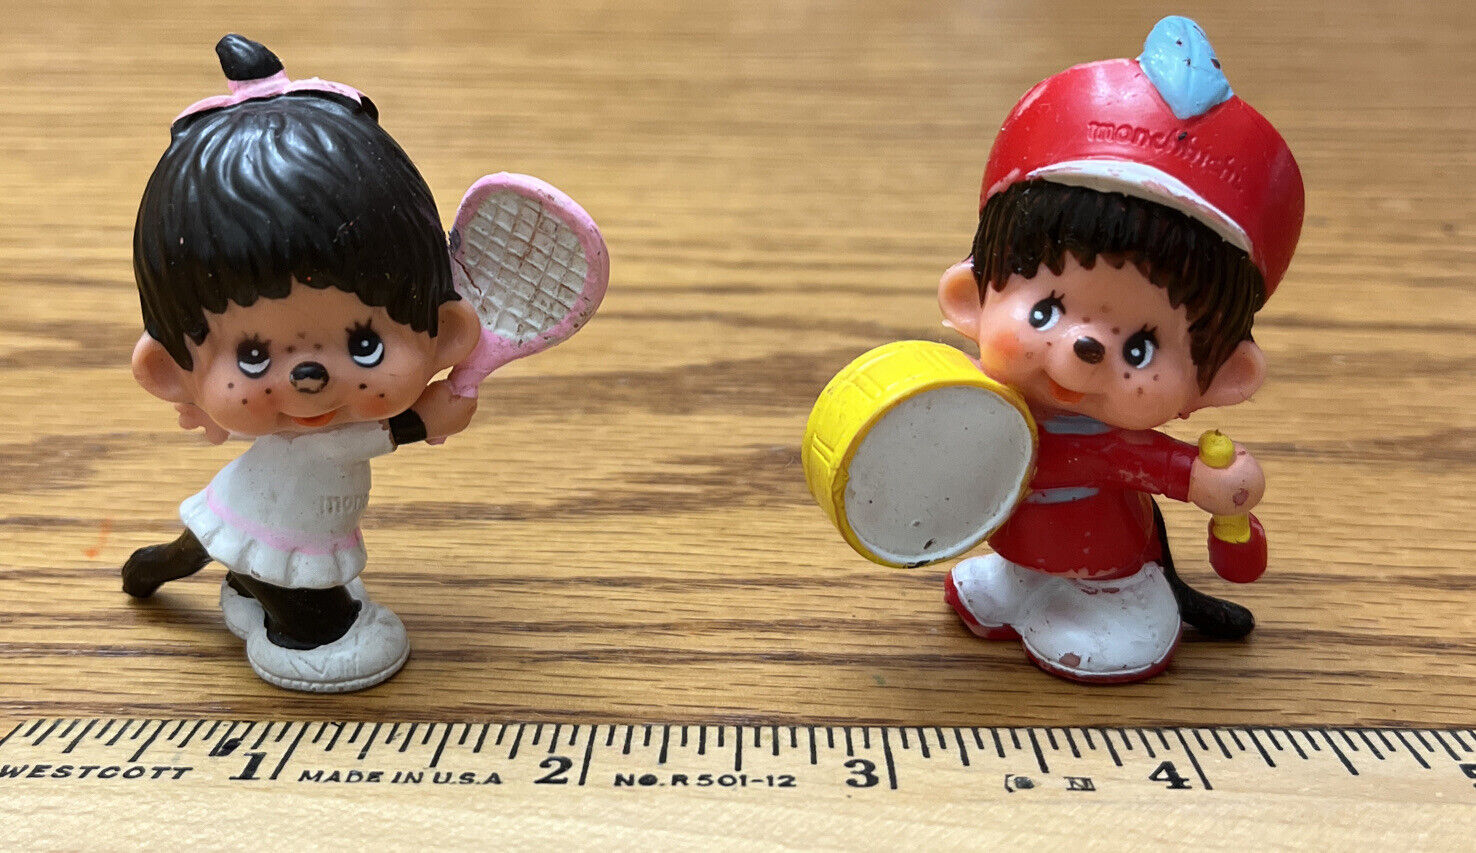 1979 Vintage Monchhichi Monkey PVC Figure Drummer Band Drums and Tennis Player